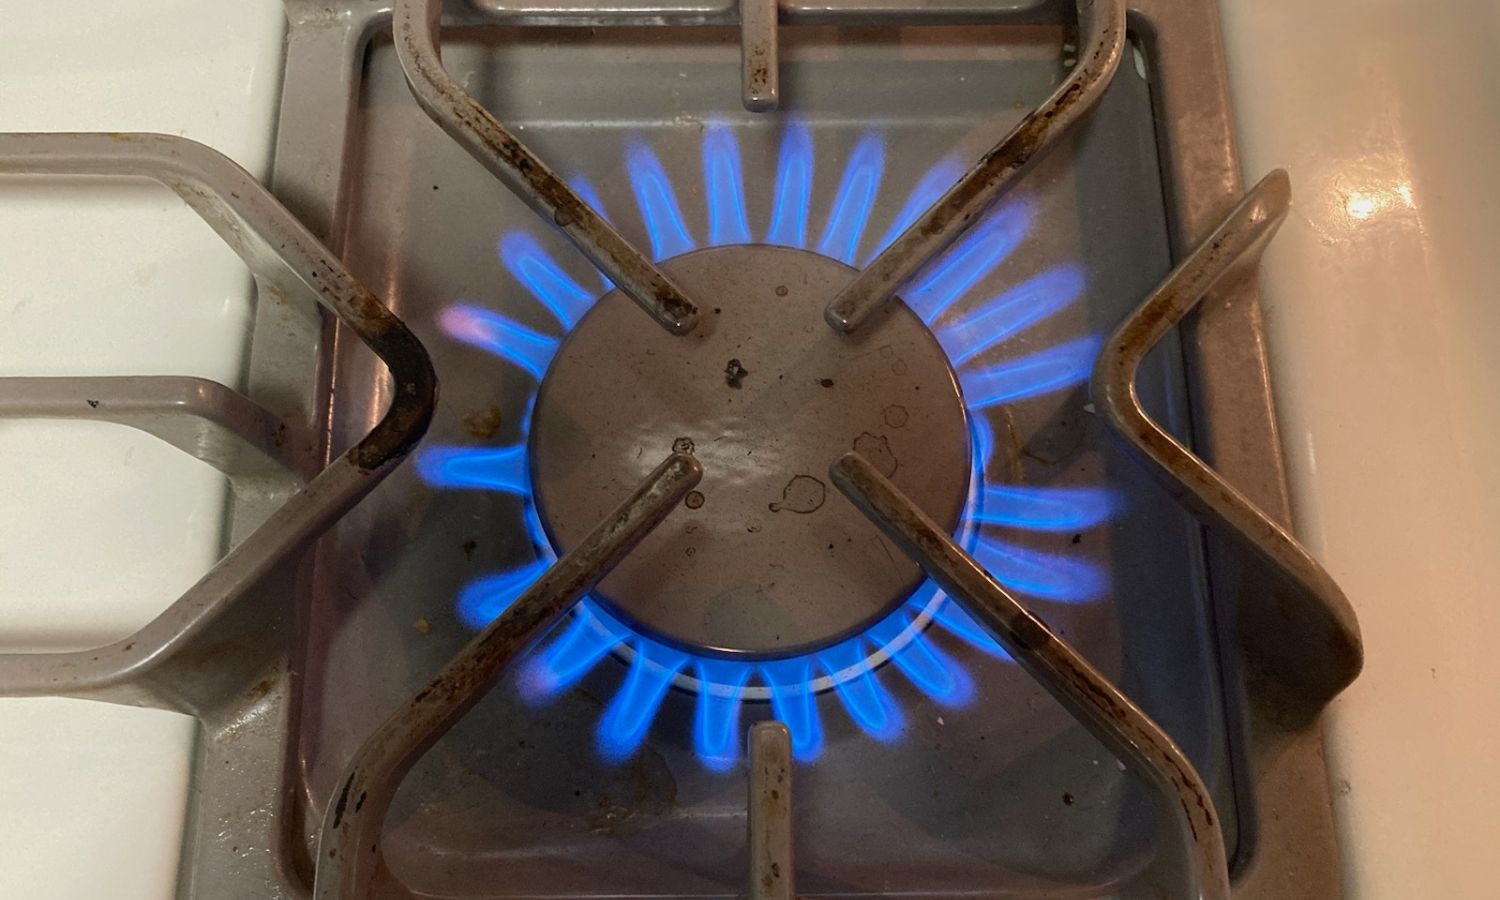 Gas Stoves May Soon Be Banned To Protect the Children